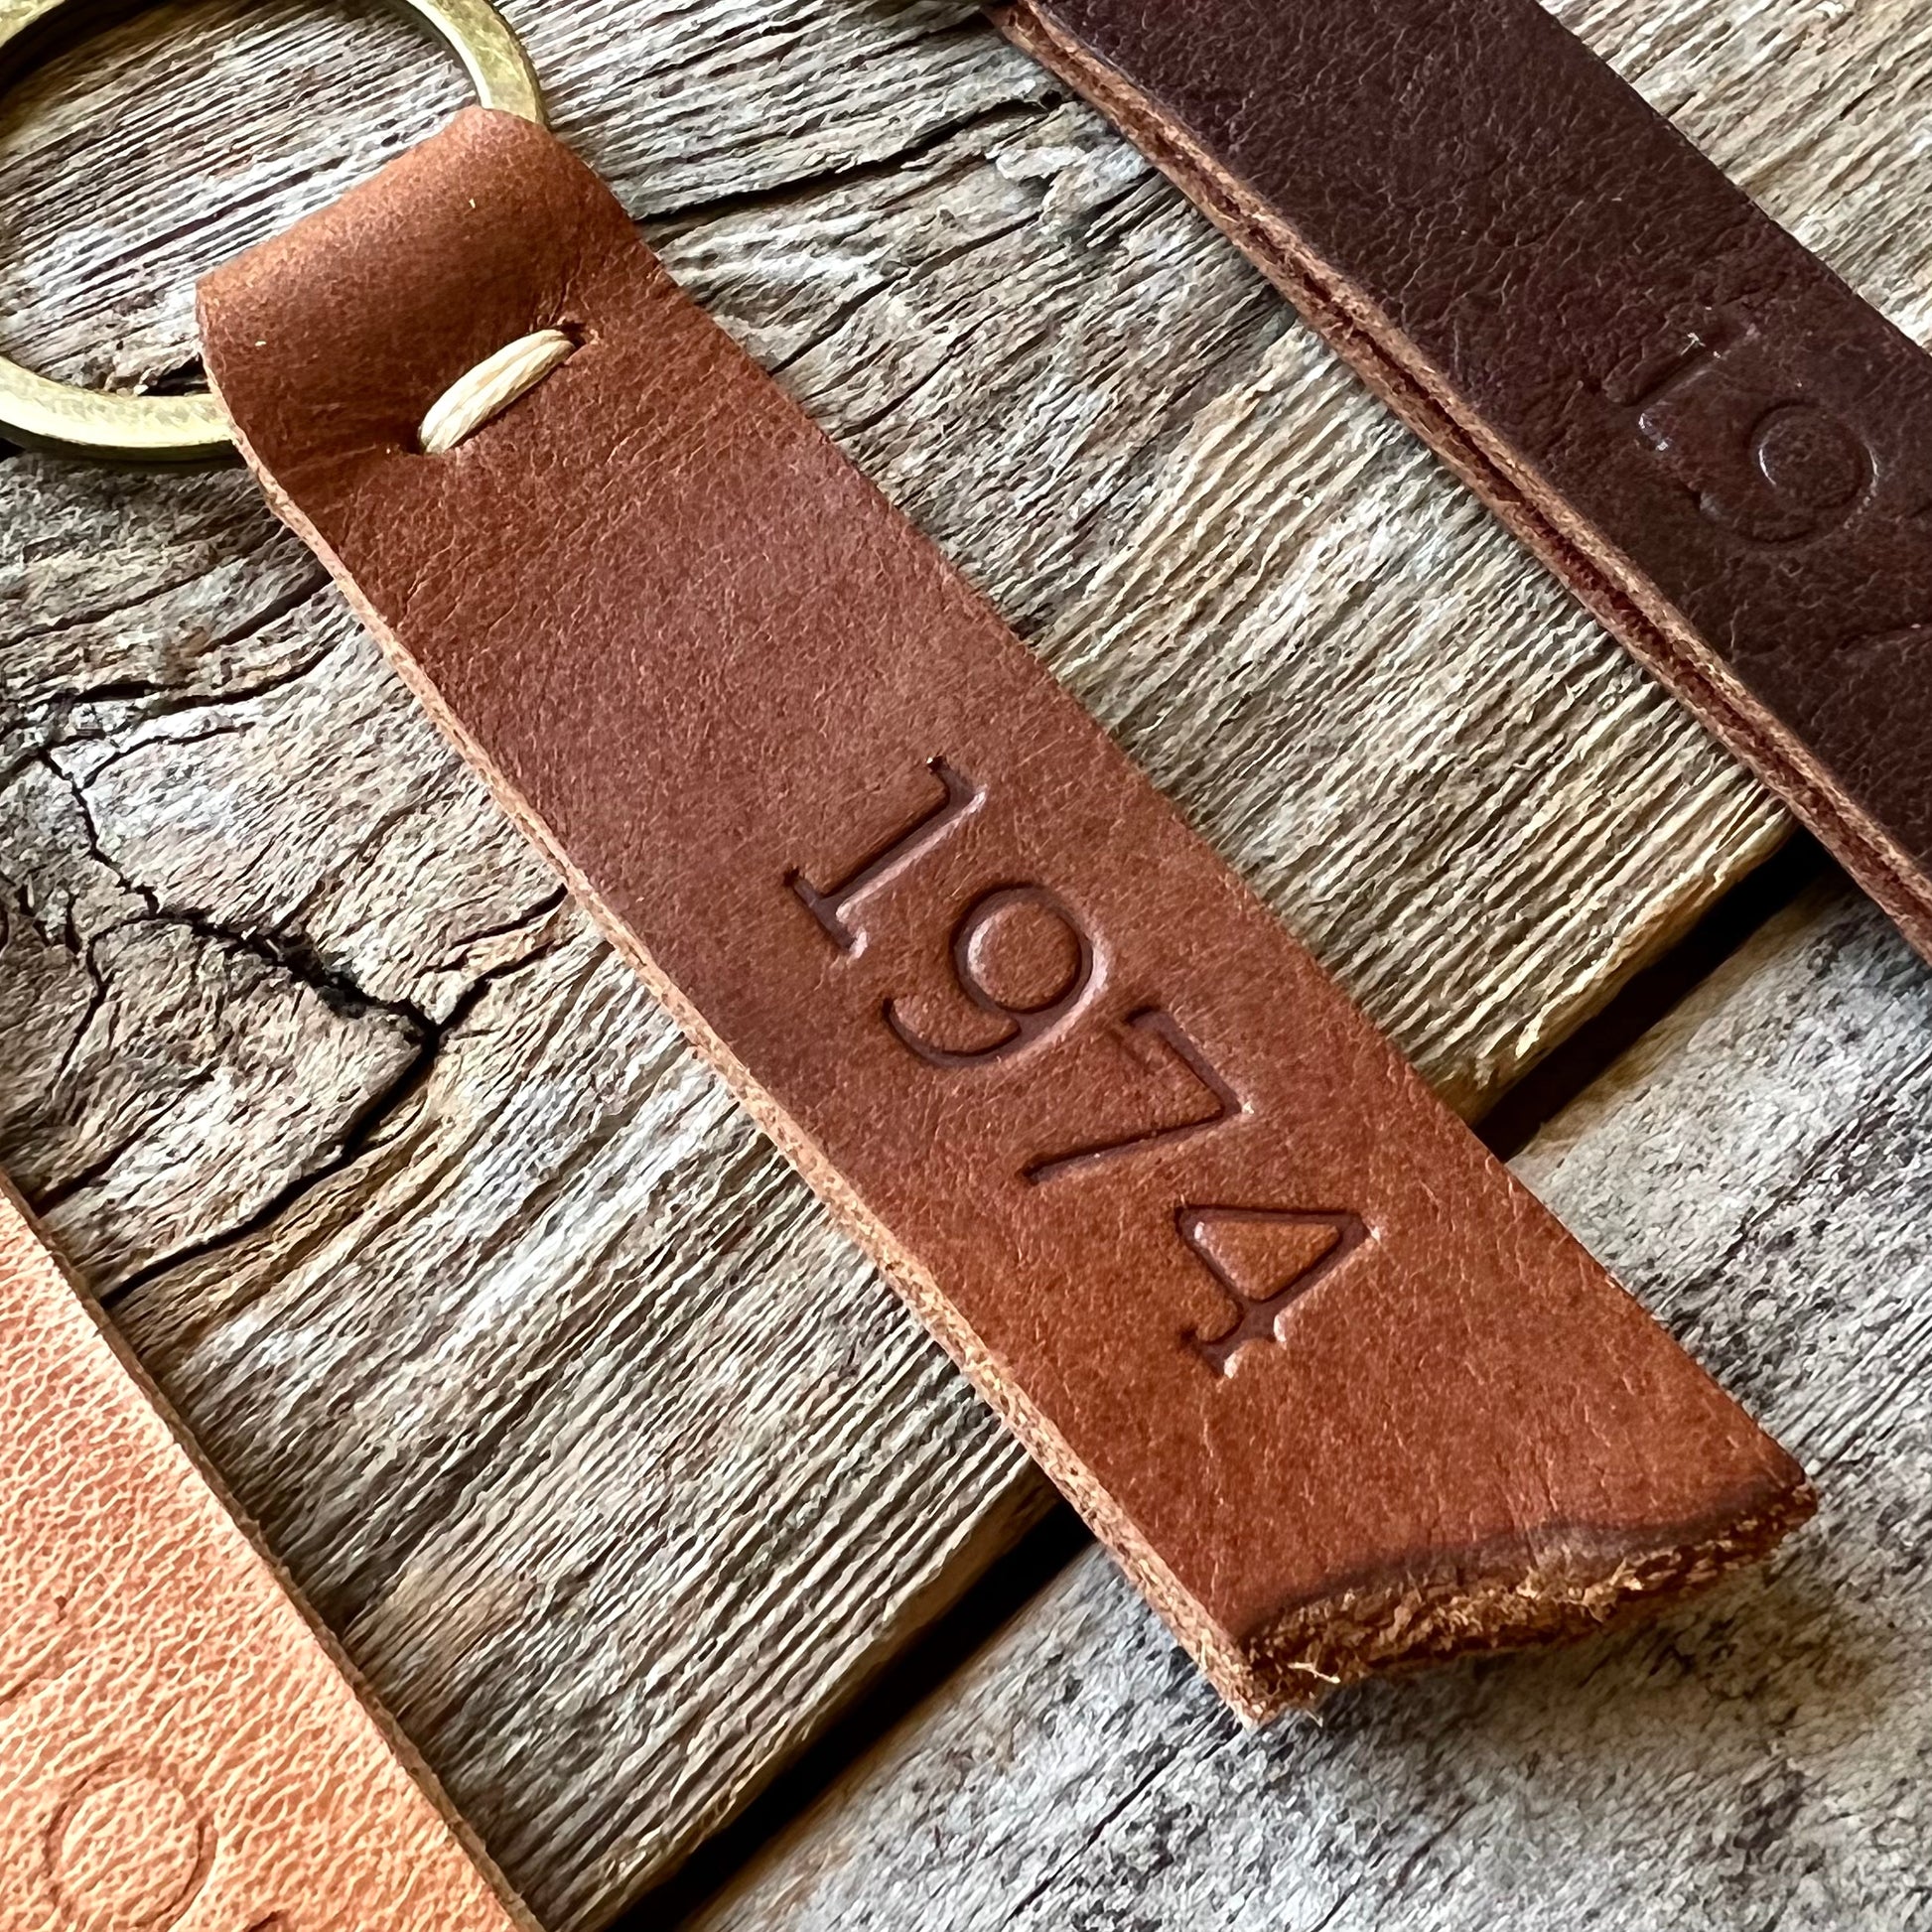 1974 Branded Leather Key Fob In Hickory